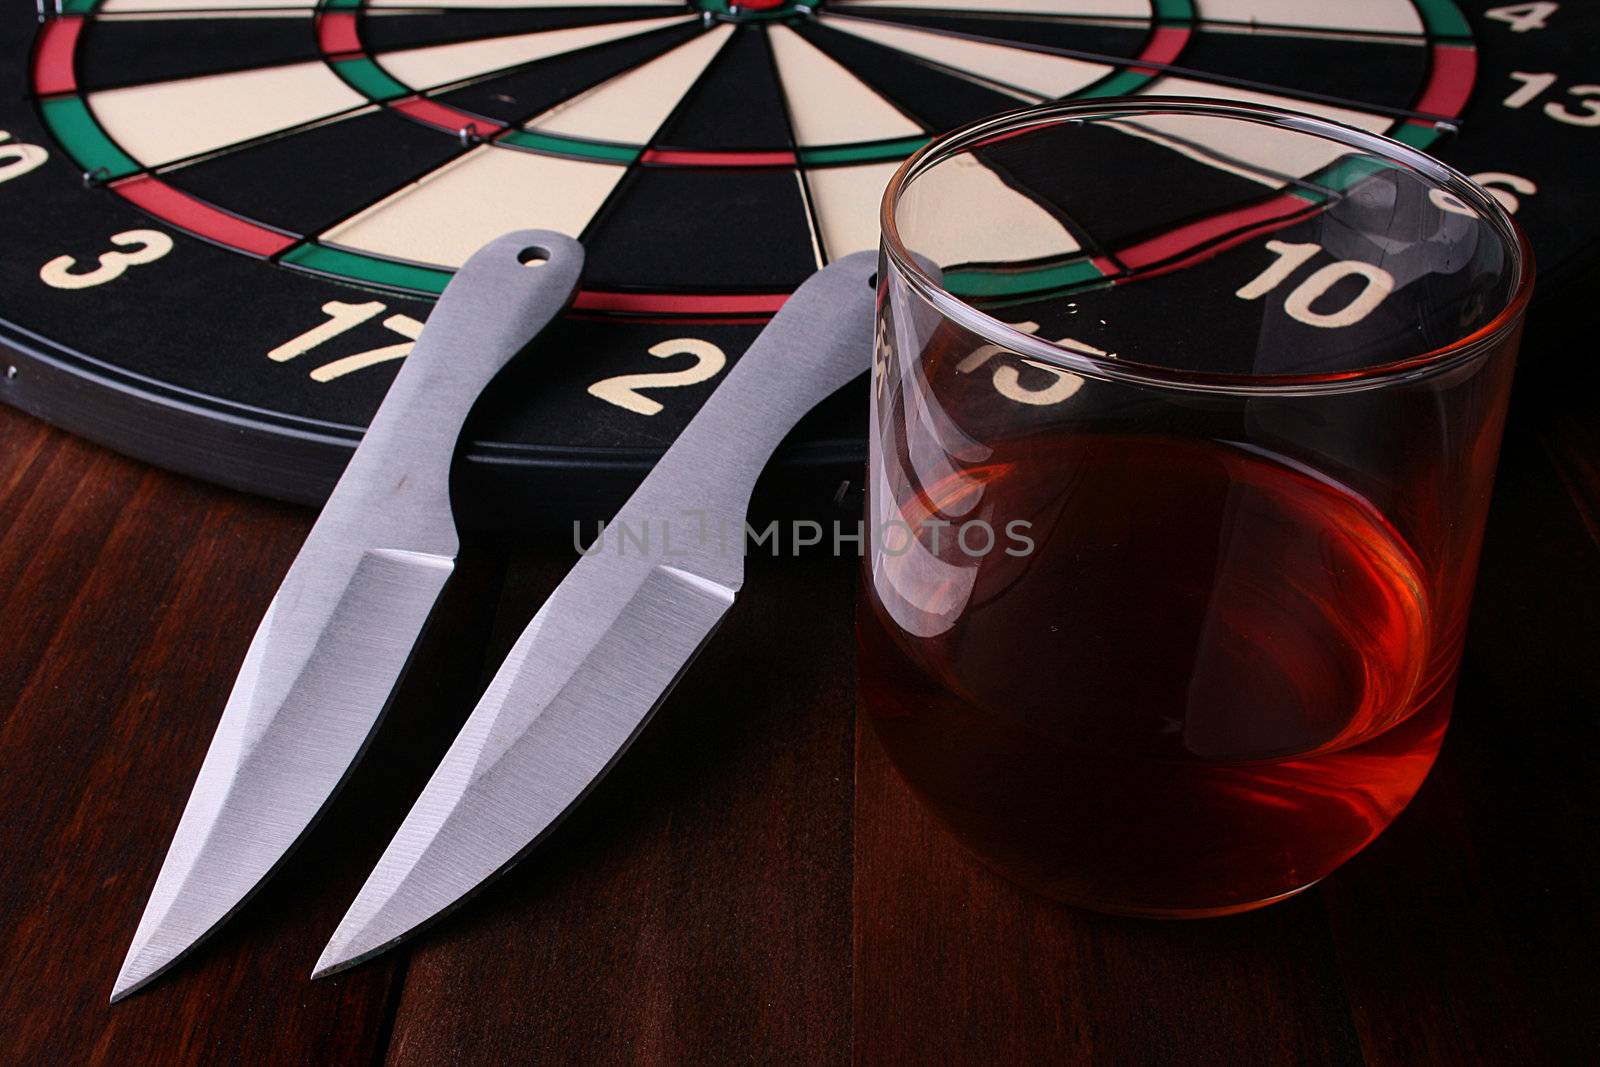 Two knifes for a throwing, a target and a glass of whisky.